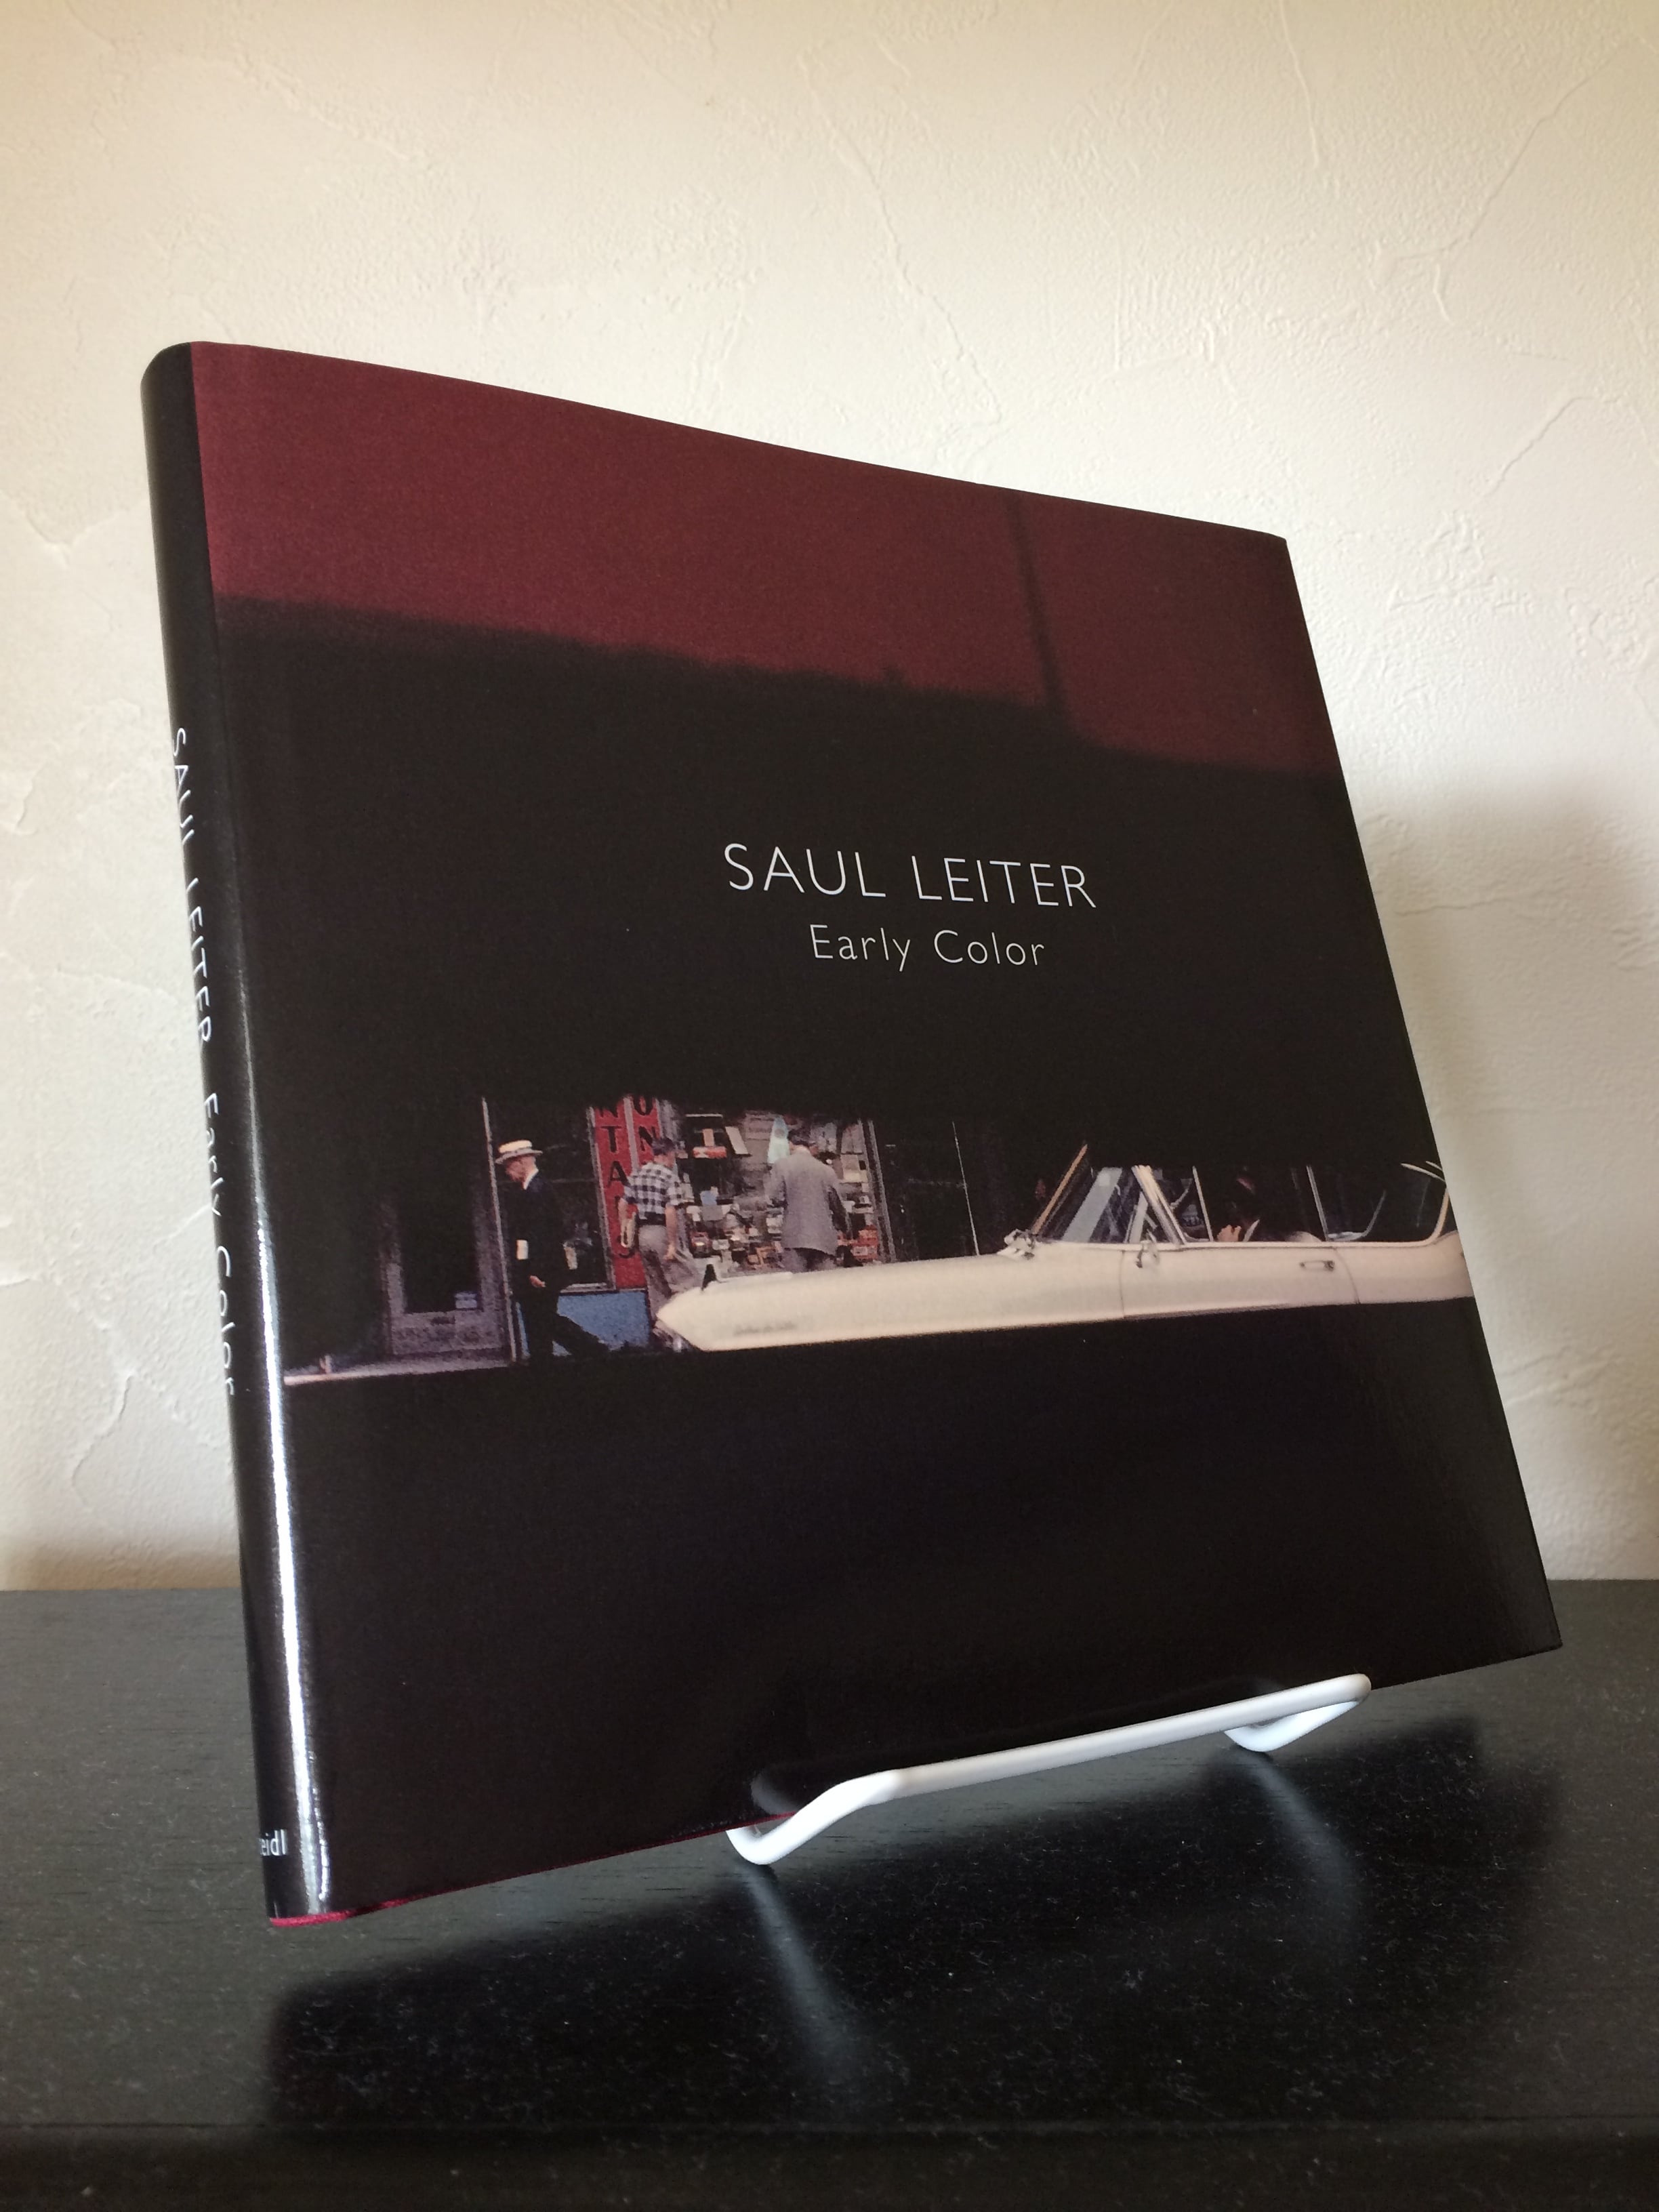 Saul Leiter / Early Color / ソール・ライター | Photobooks on the Road